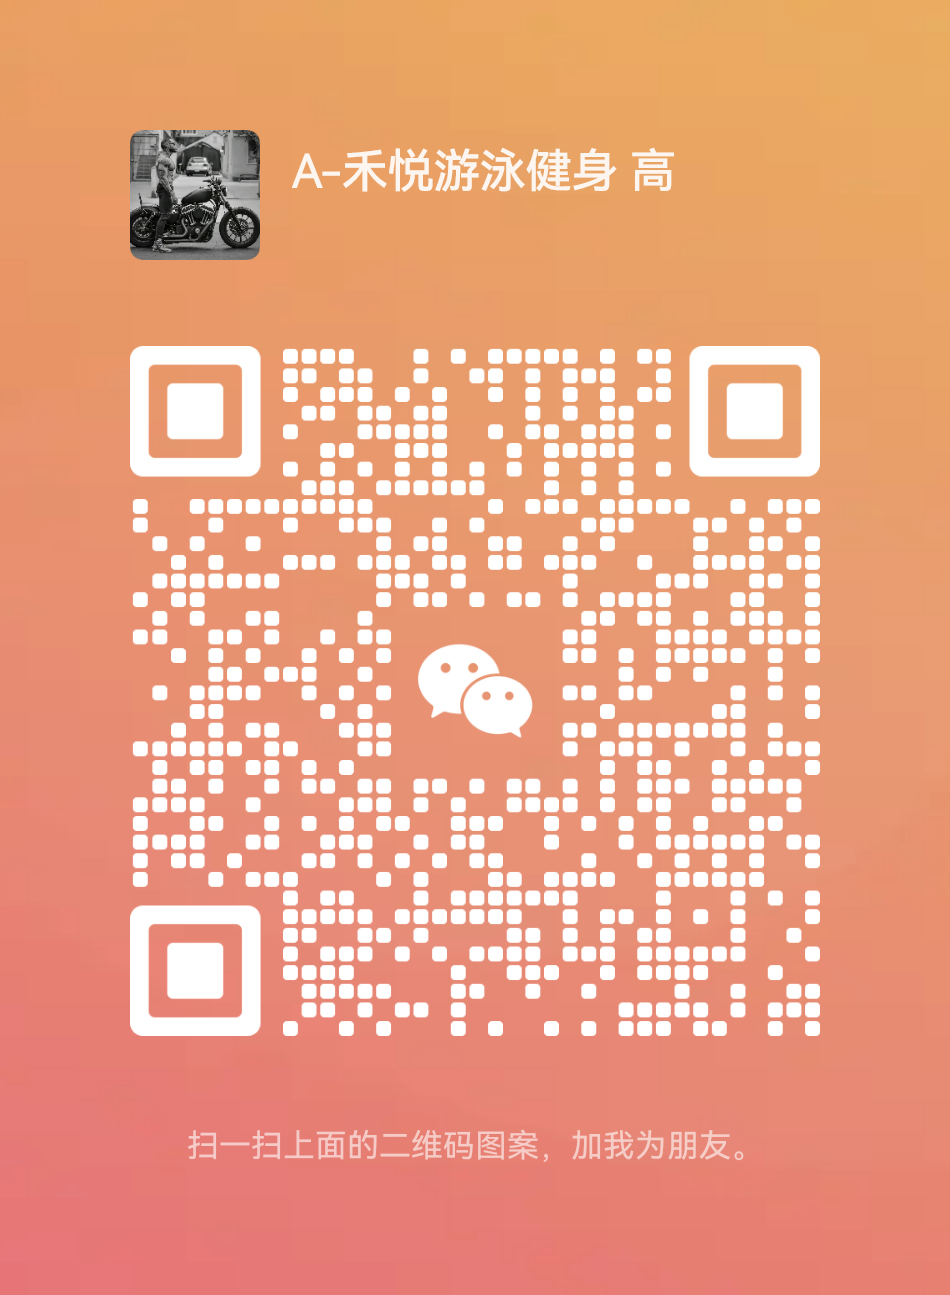 mmqrcode1698203698272.png